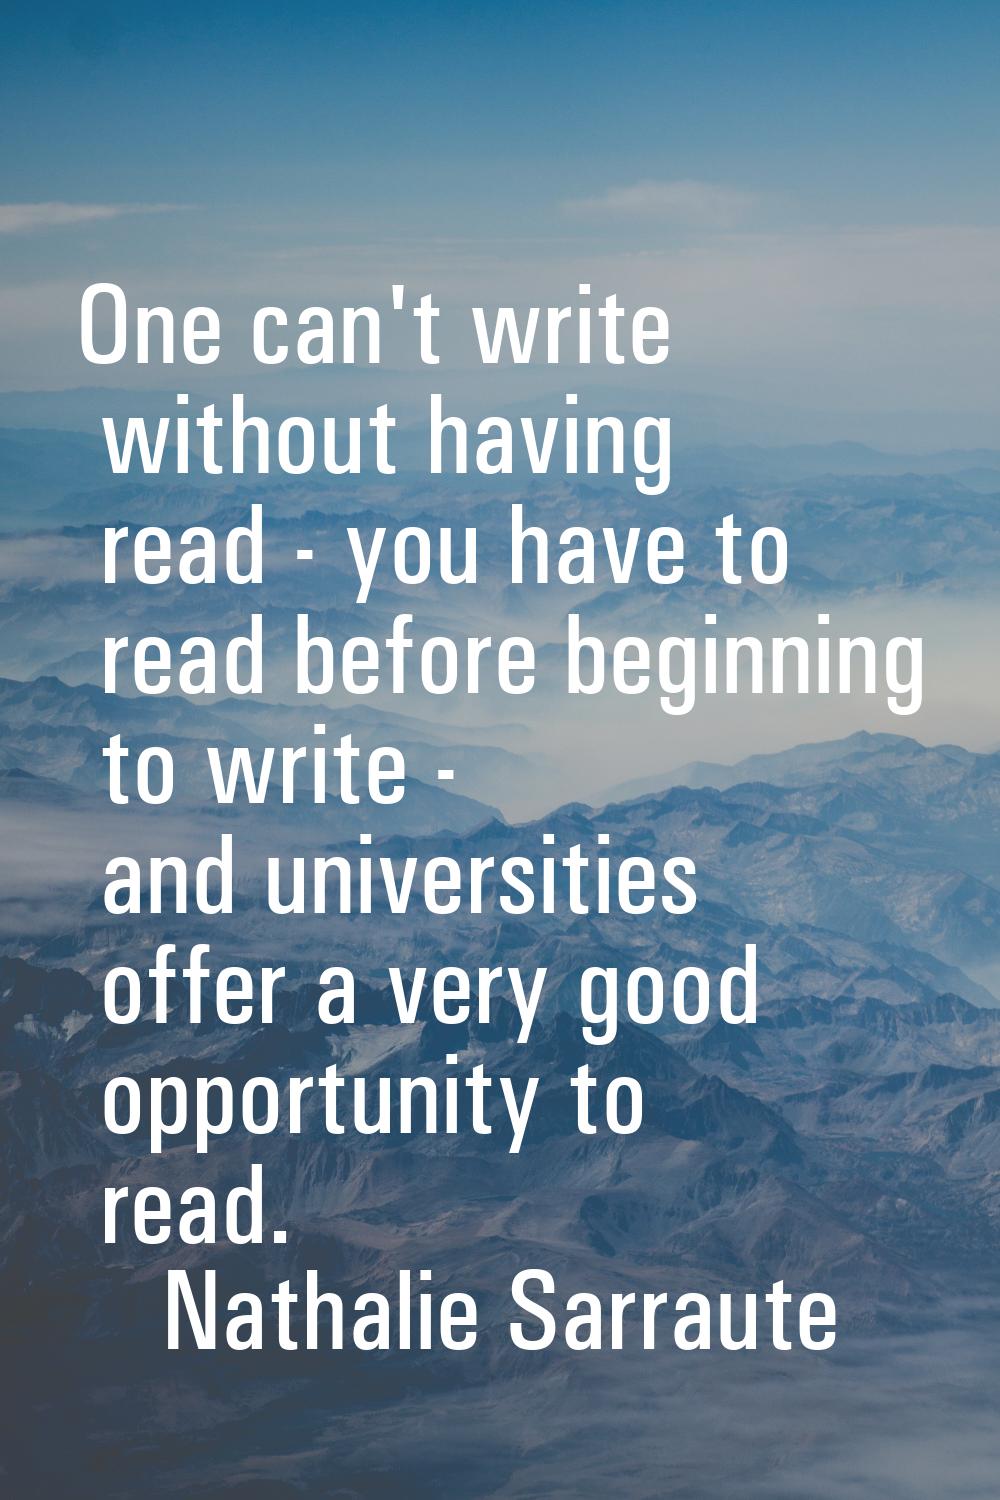 One can't write without having read - you have to read before beginning to write - and universities